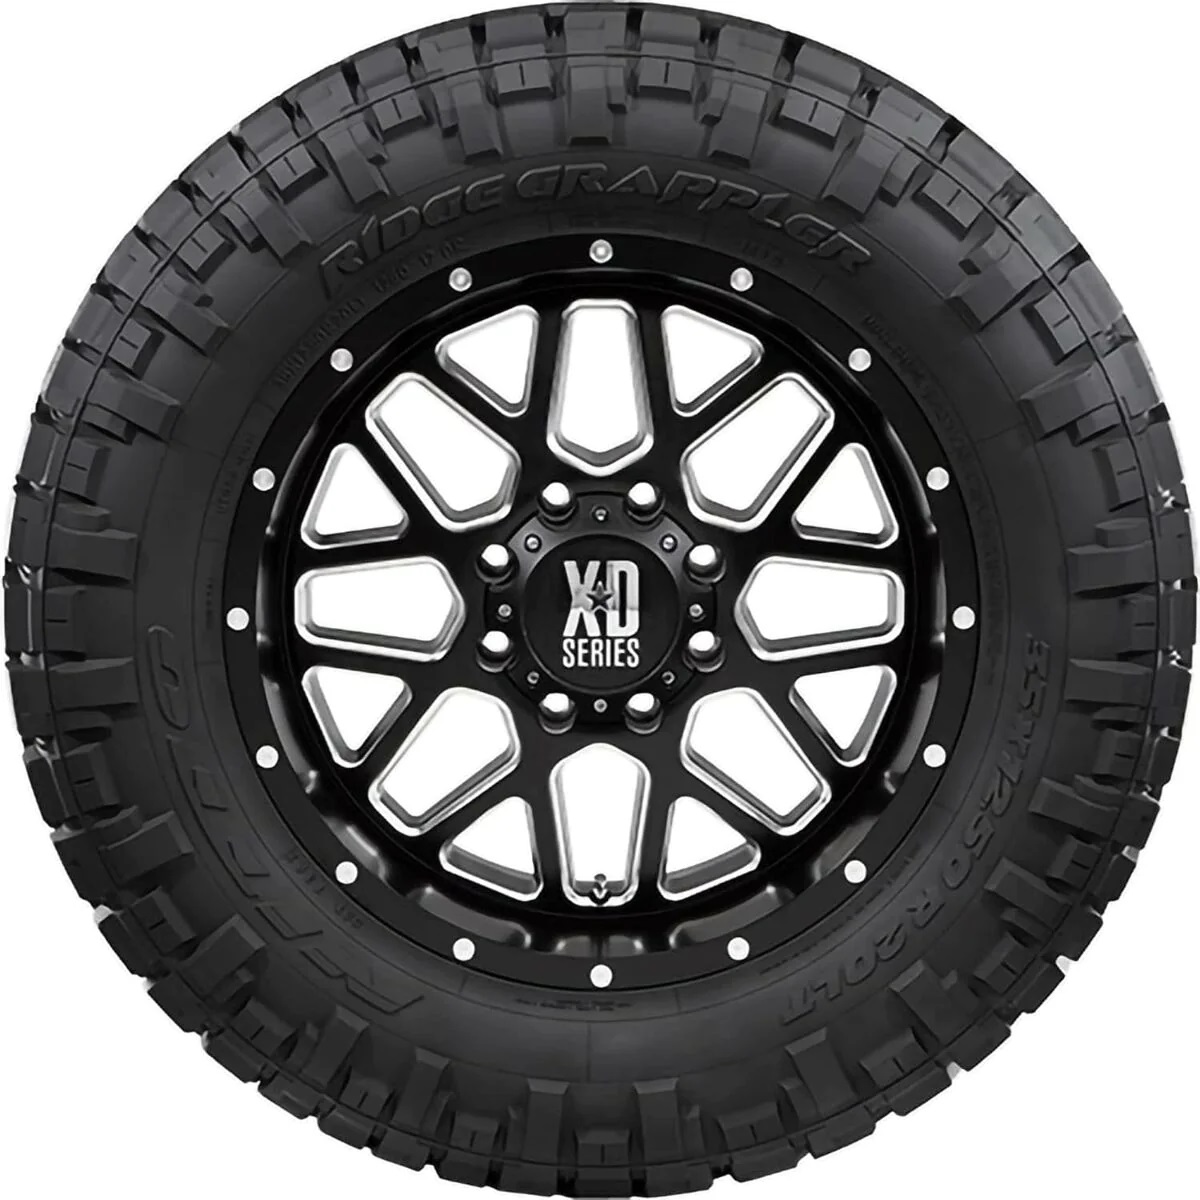 Ford Bronco Nitto Ridge Grappler Tire 265/70-16 for Ford Bronco - 217930 whp-217930-x2-f7ac72e91a9b37b87481b04c8fb52bd7eb07e9ad-3